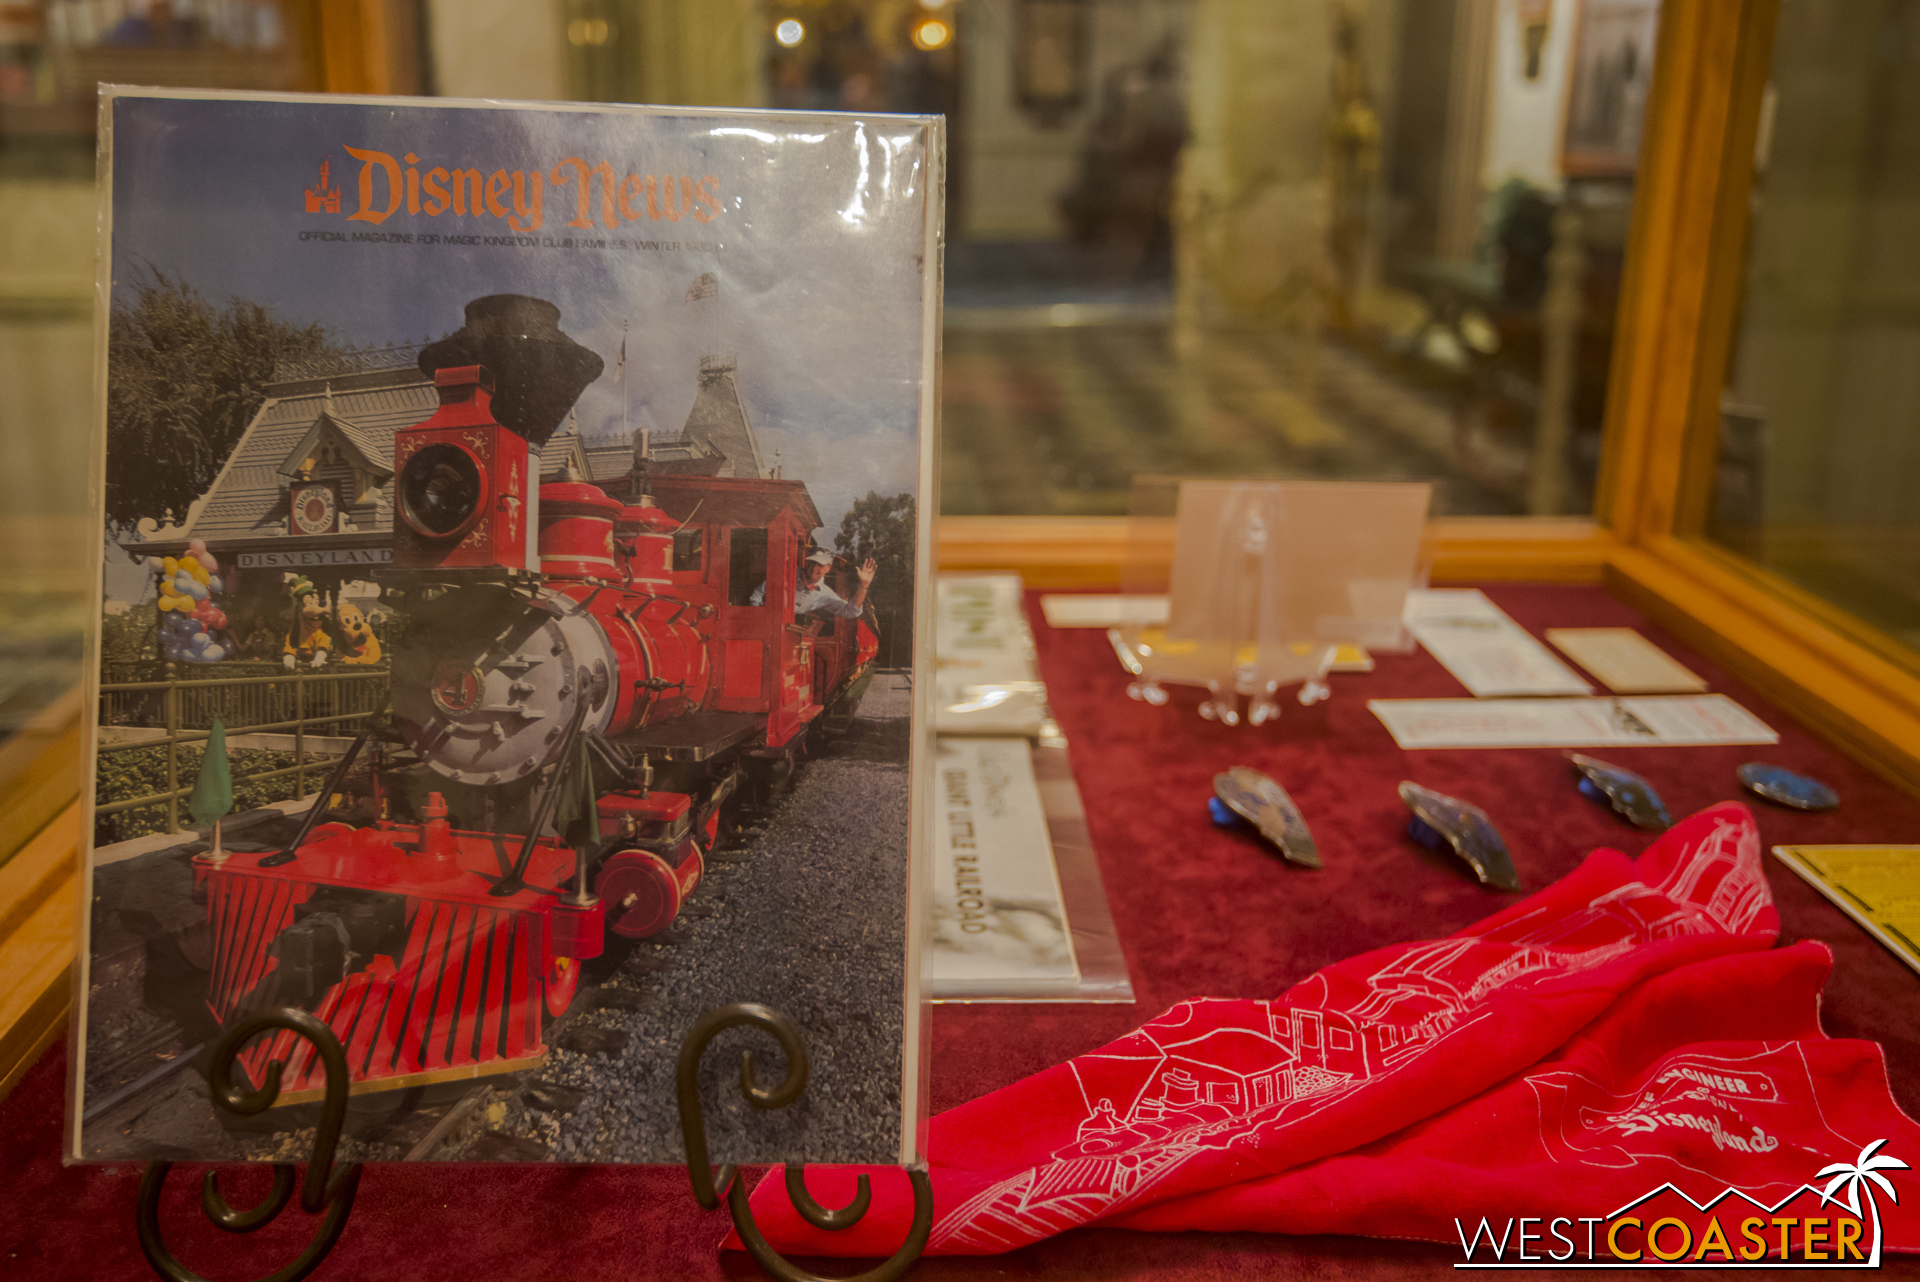  There are also displays on Disneyland Railroad related memorabilia of times past. 